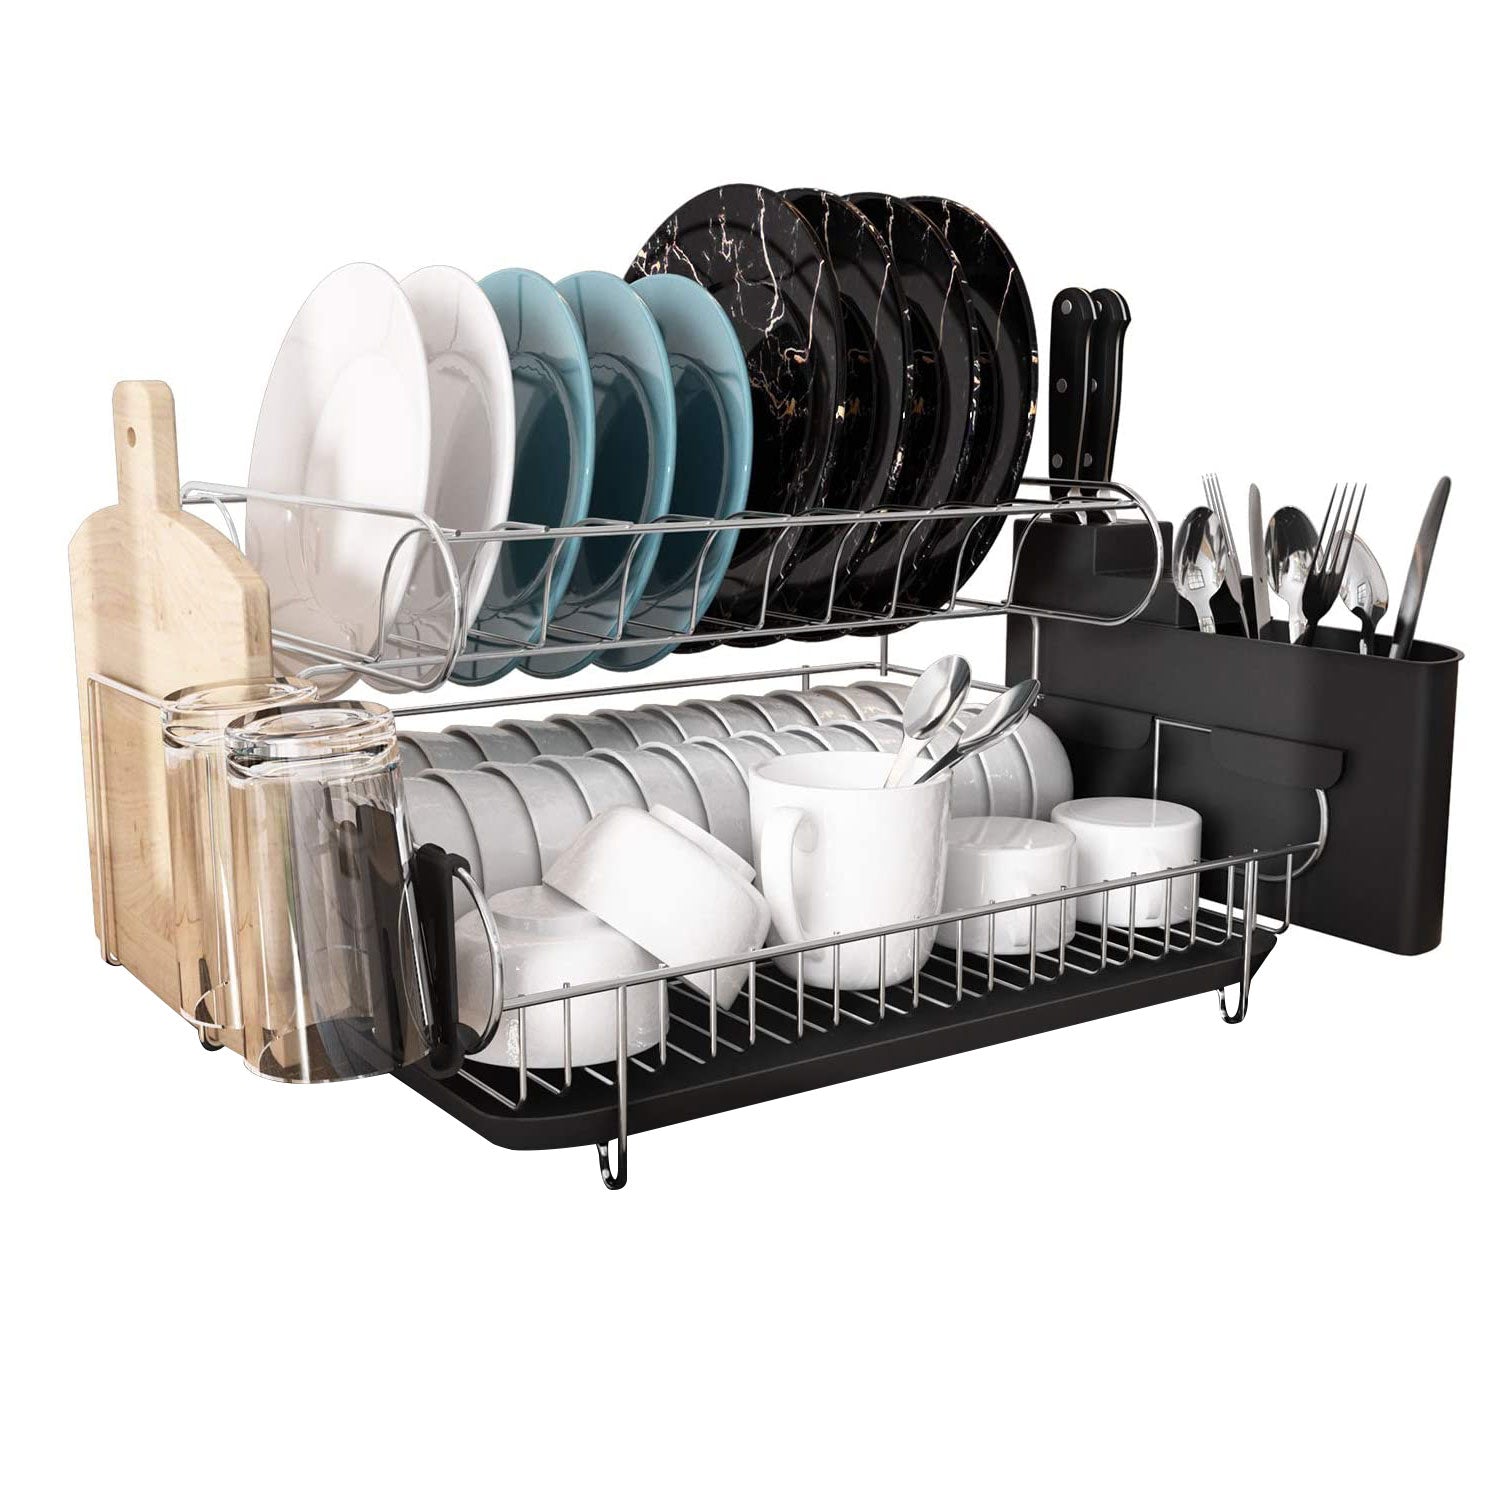 Dish Drying Rack, 2 Tier Large Dish Rack and Drainboard Set for Kitchen  Counter.